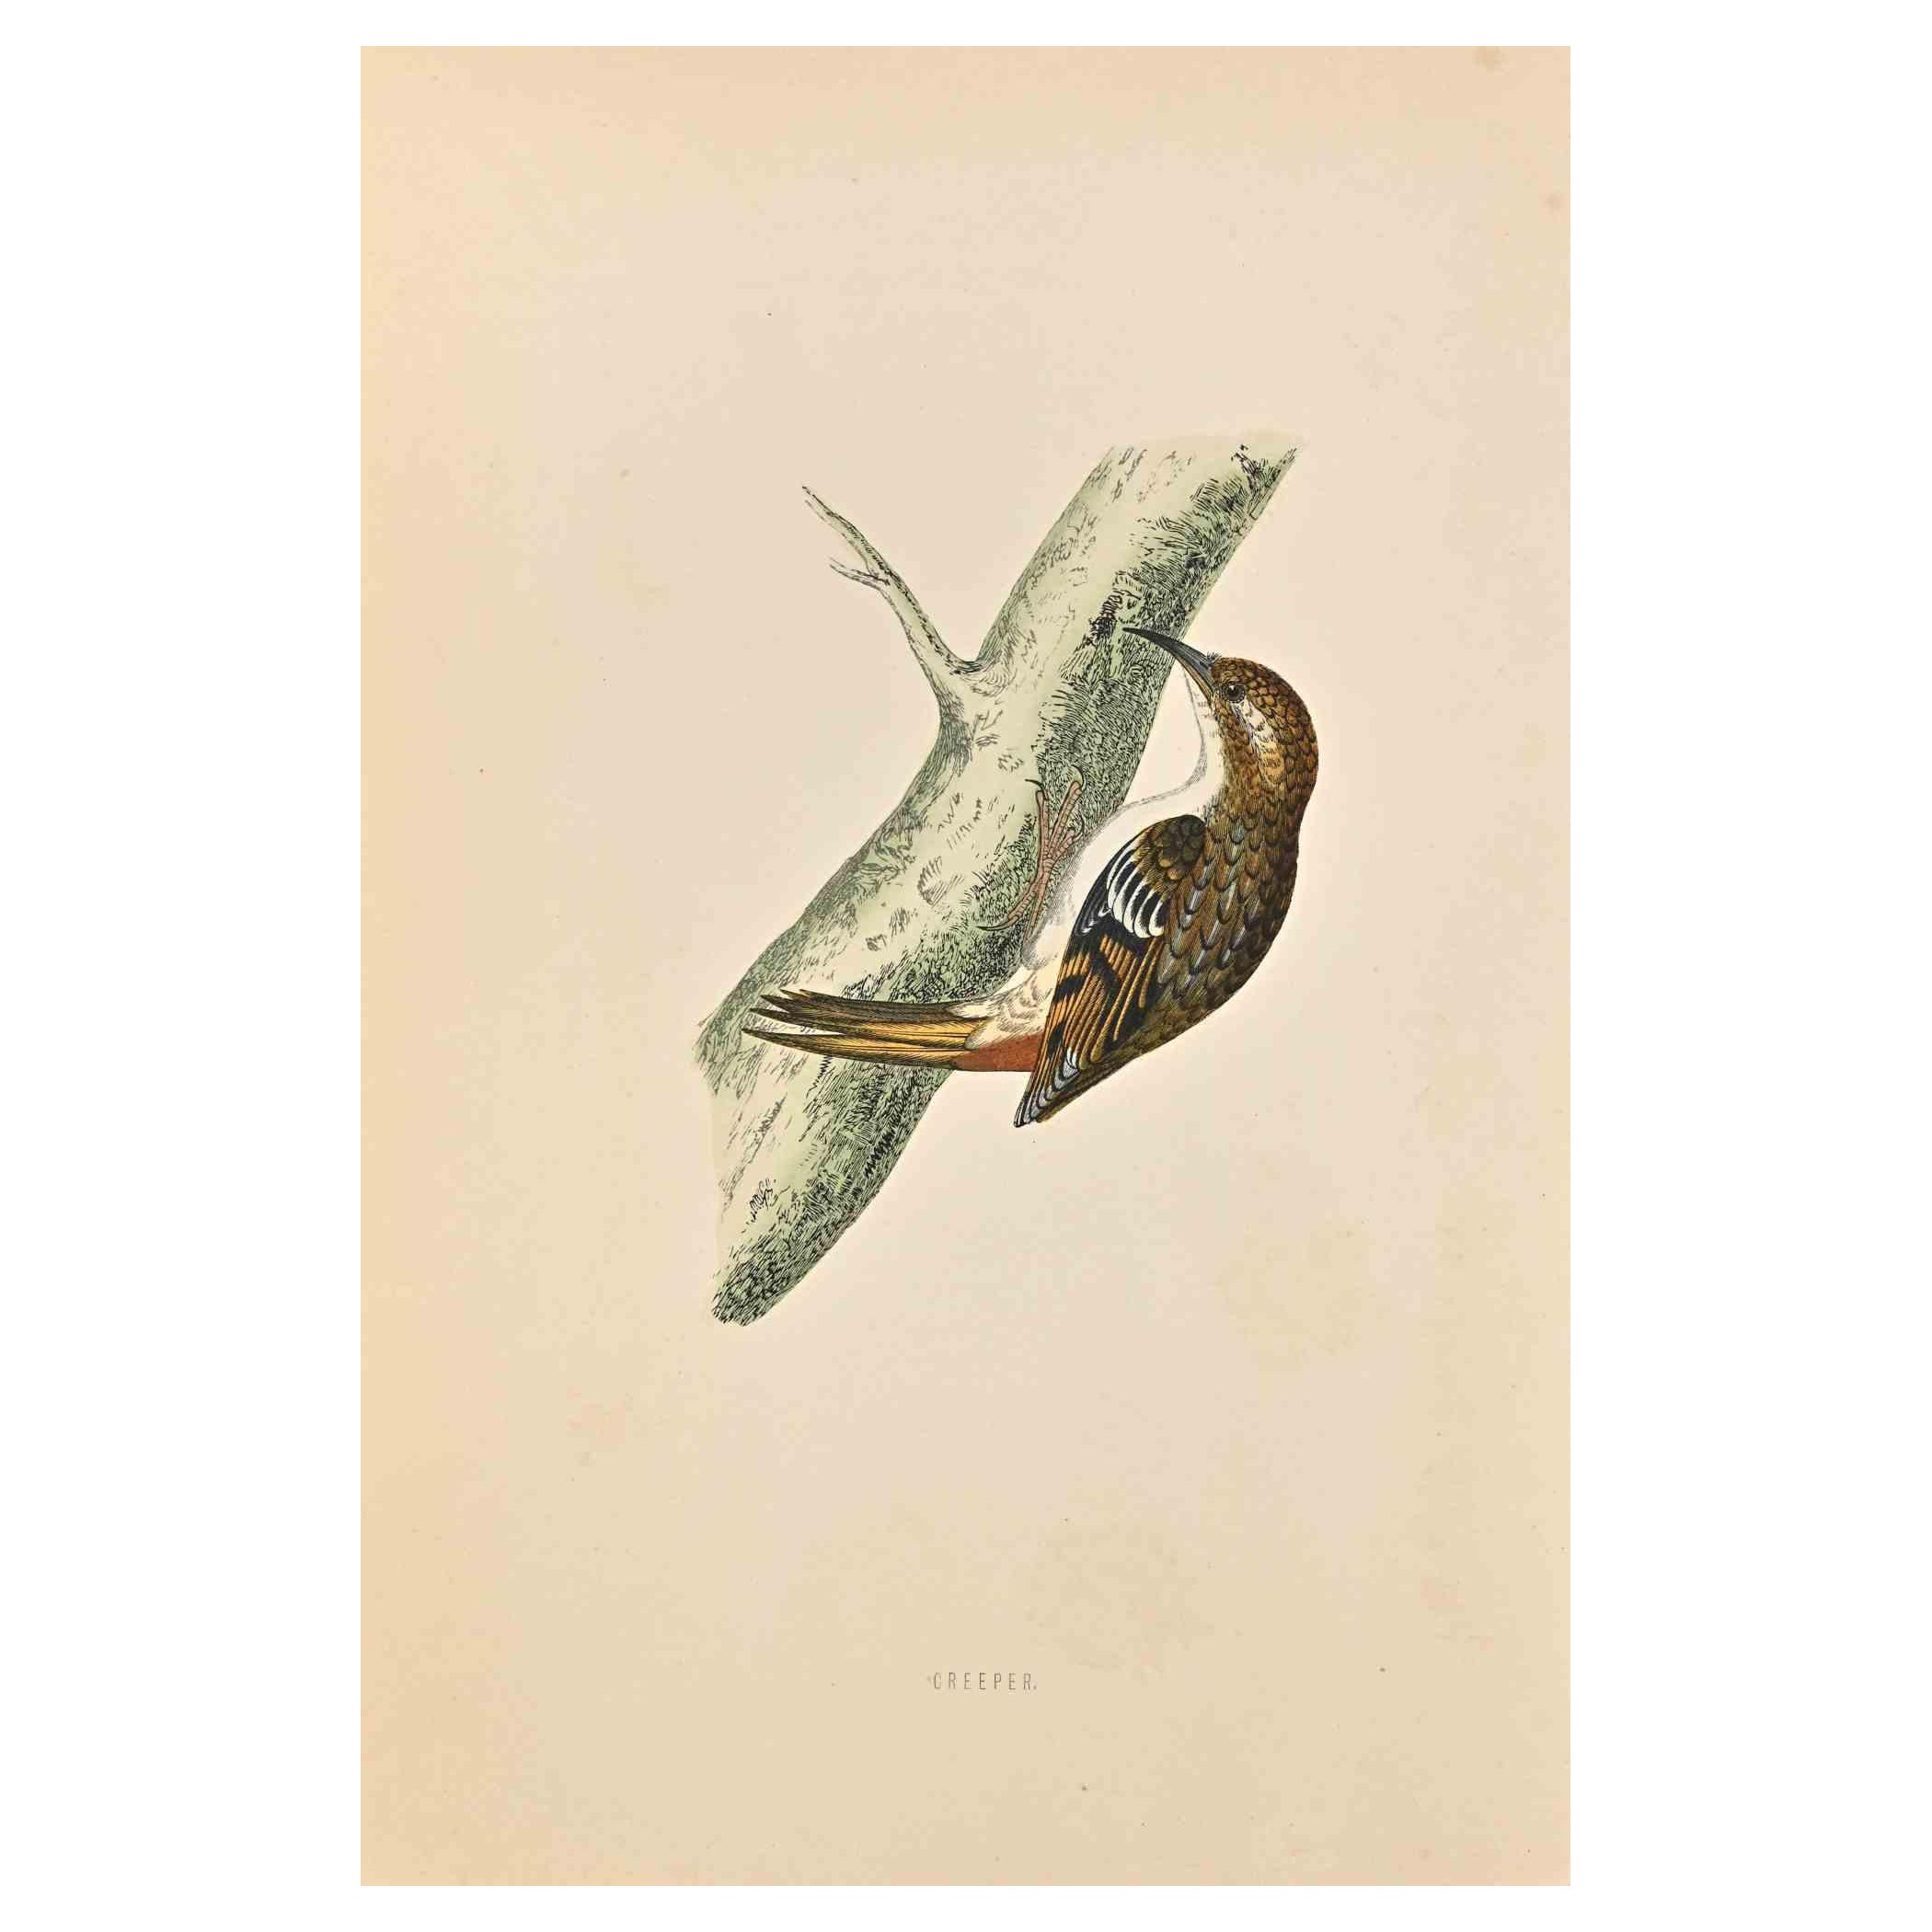 Creeper  is a modern artwork realized in 1870 by the British artist Alexander Francis Lydon (1836-1917) . 

Woodcut print, hand colored, published by London, Bell & Sons, 1870.  Name of the bird printed in plate. This work is part of a print suite